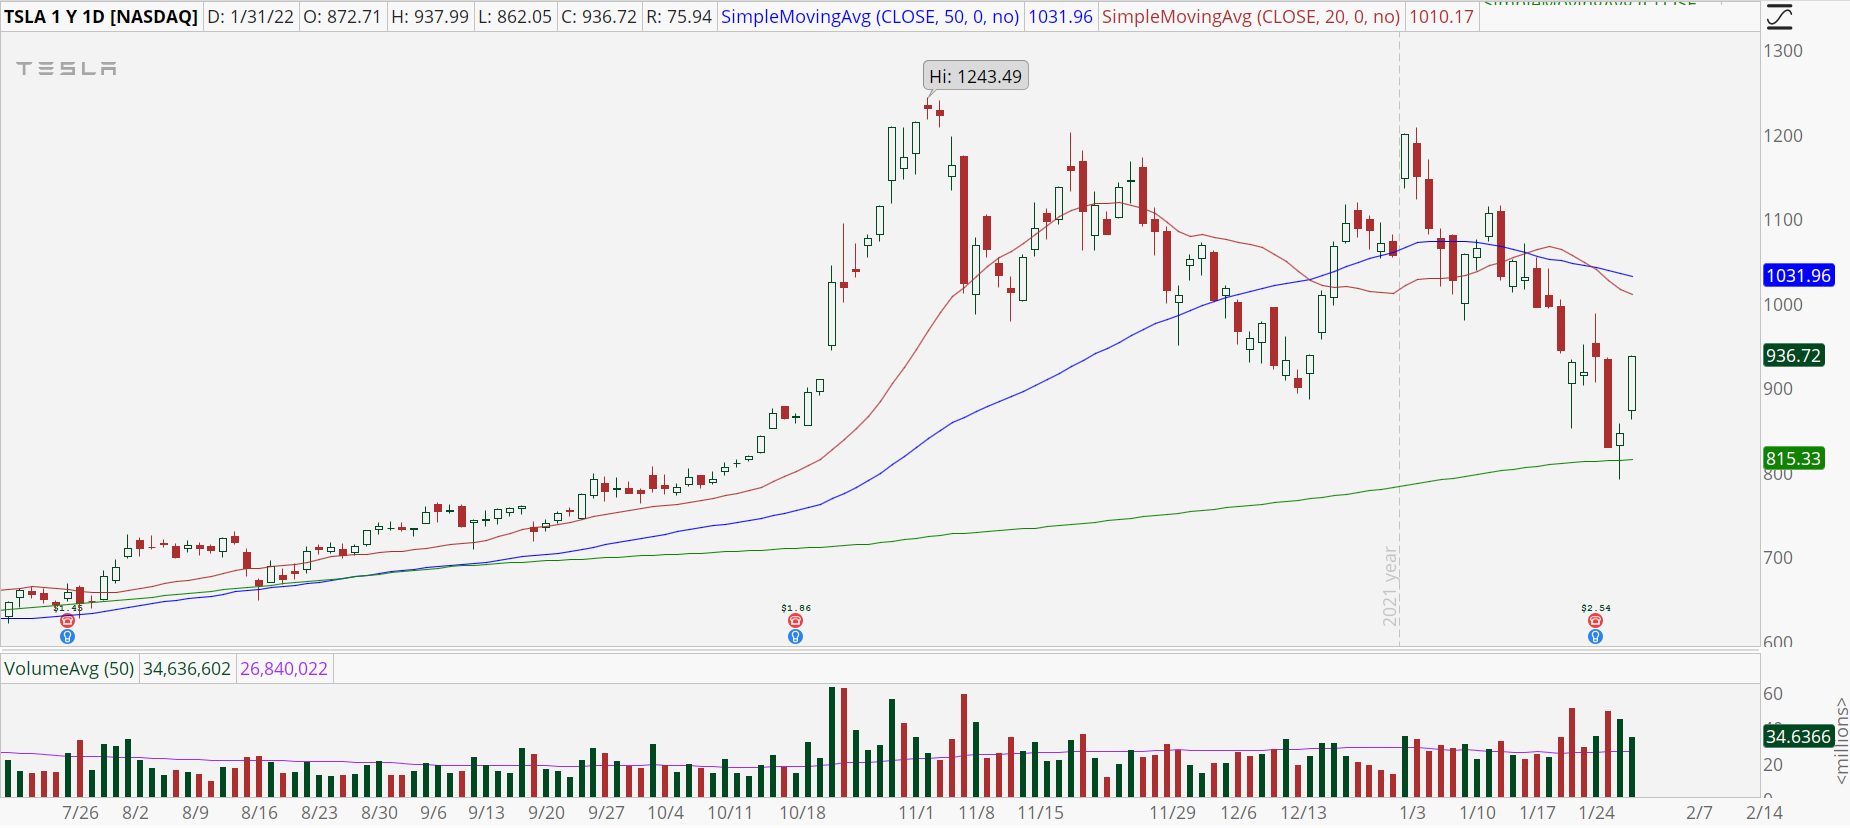 Tesla (TSLA) stock chart with 200-day moving average support bounce.